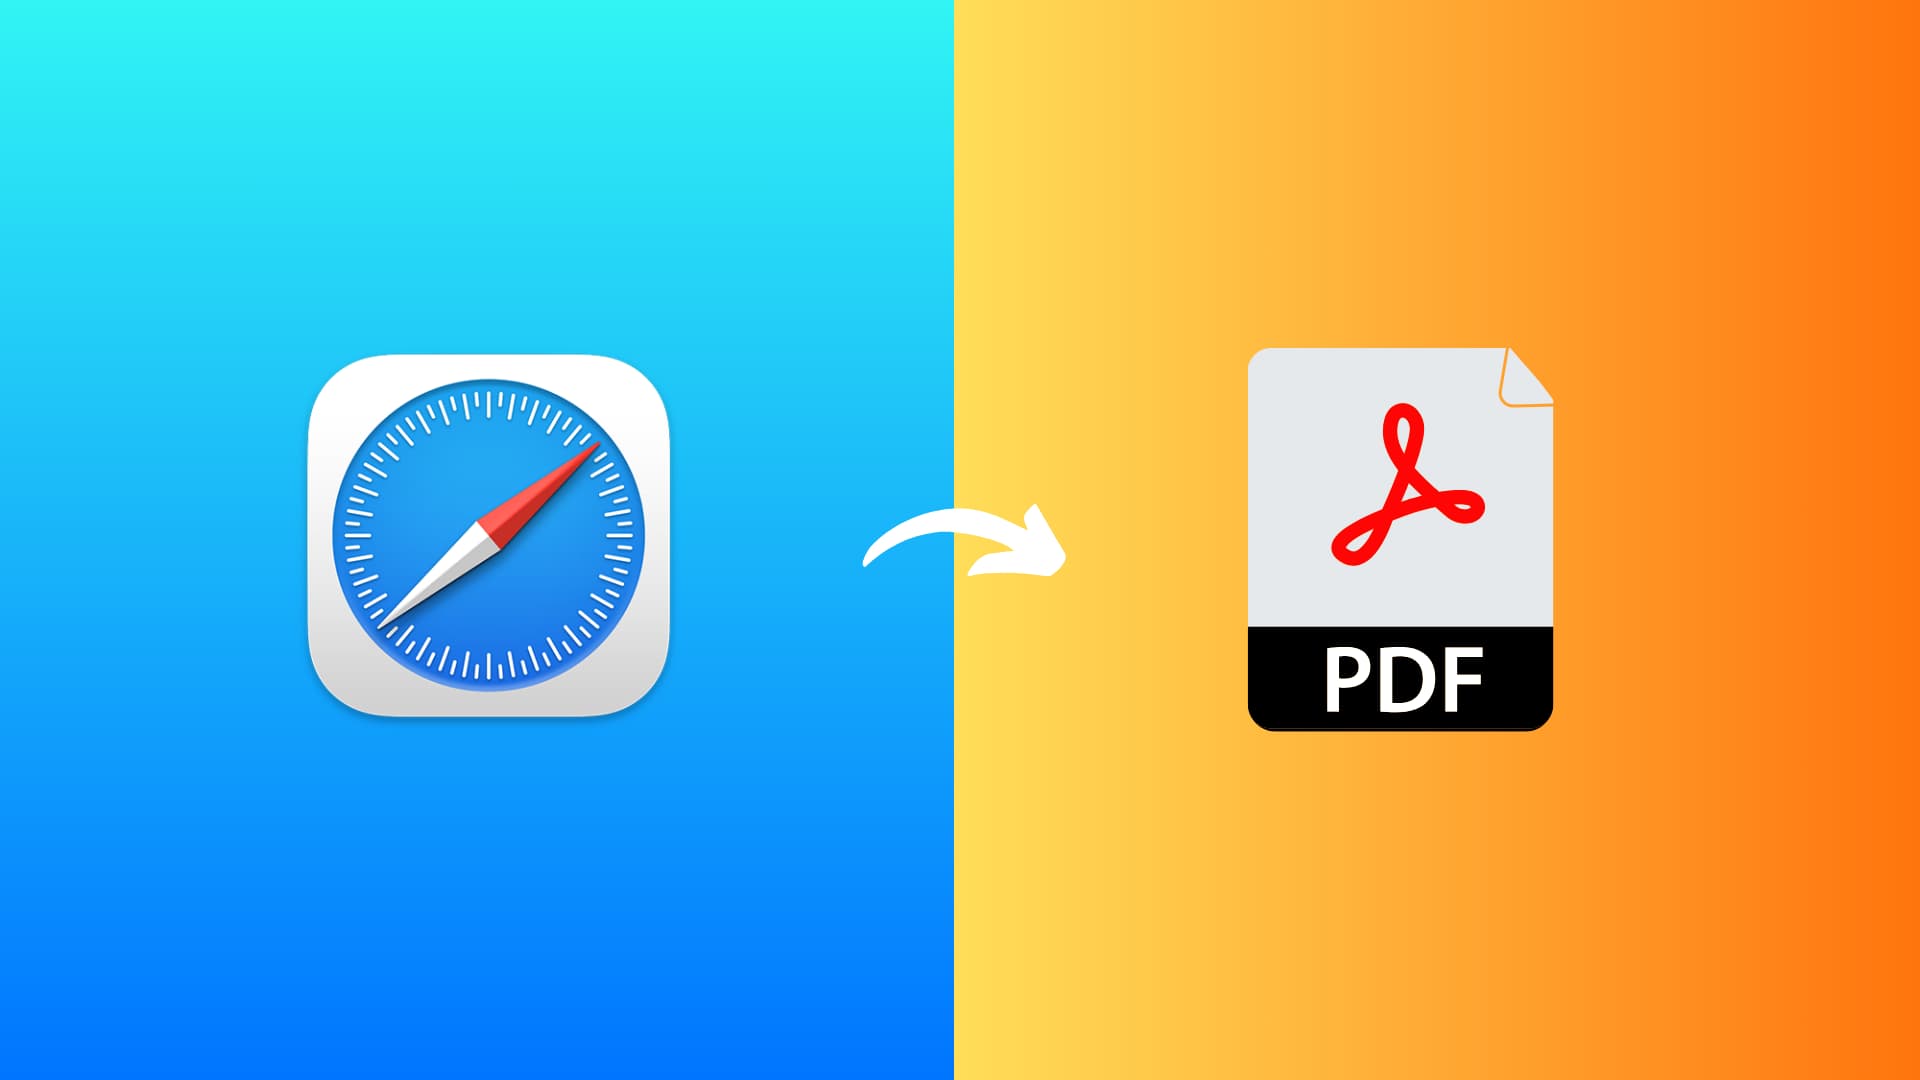 Illustration for turning a Safari web page to PDF